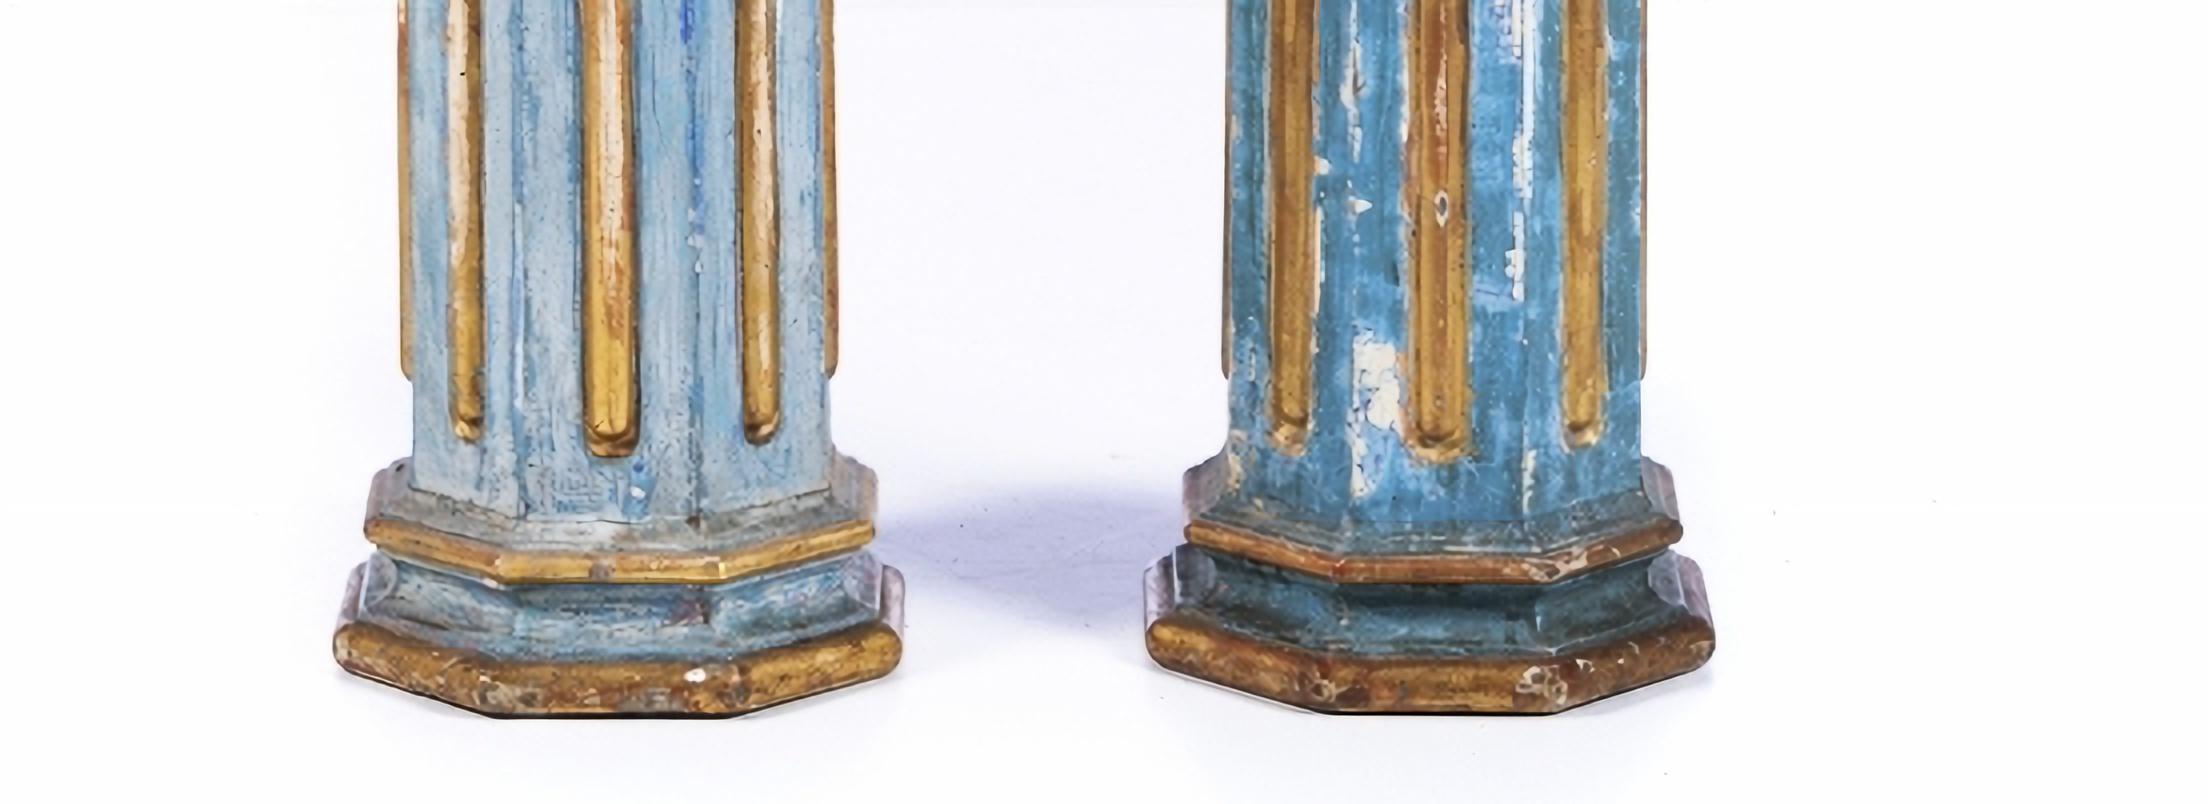 Hand-Crafted Pair of Spanish Columns 18th Century